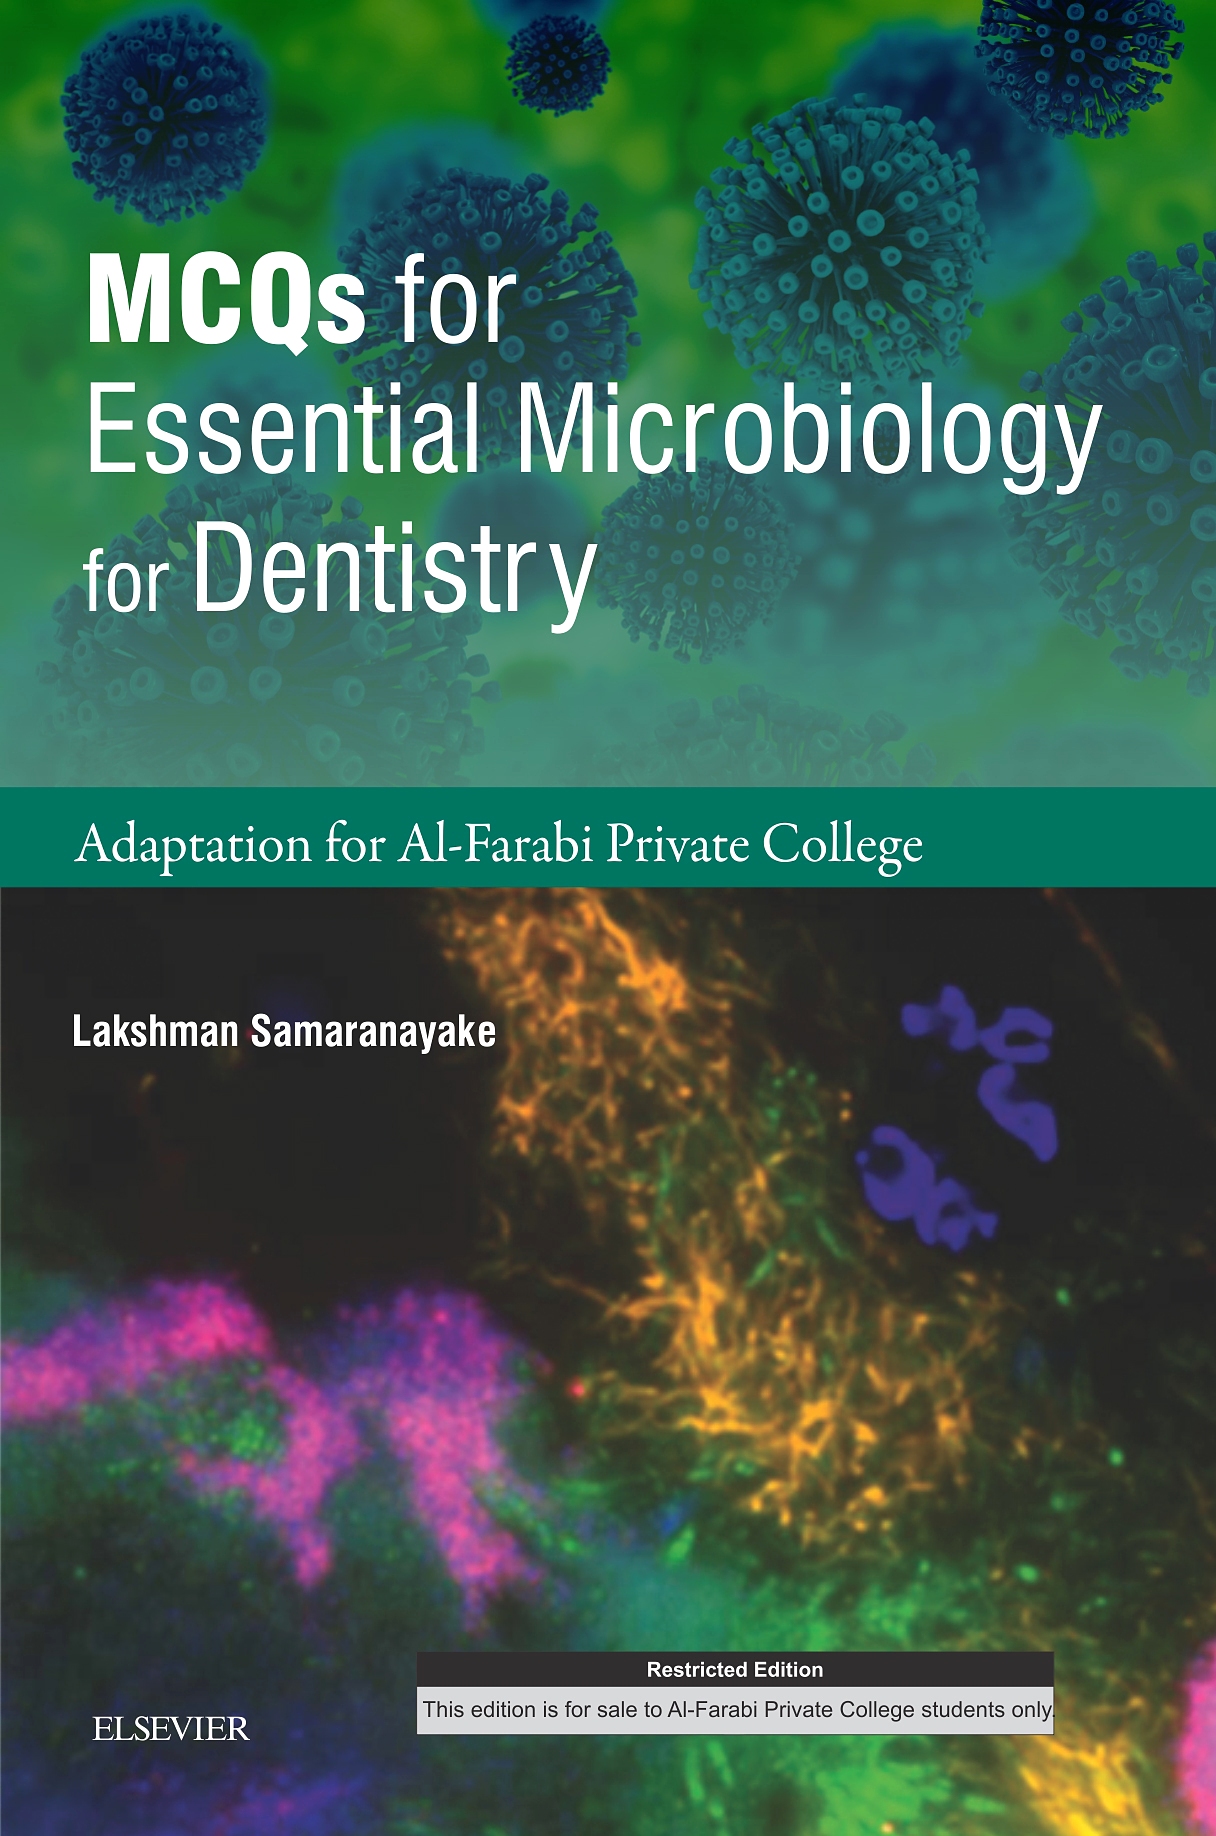 Evolve Resources for Essential Microbiology for Dentistry, 5th Edition